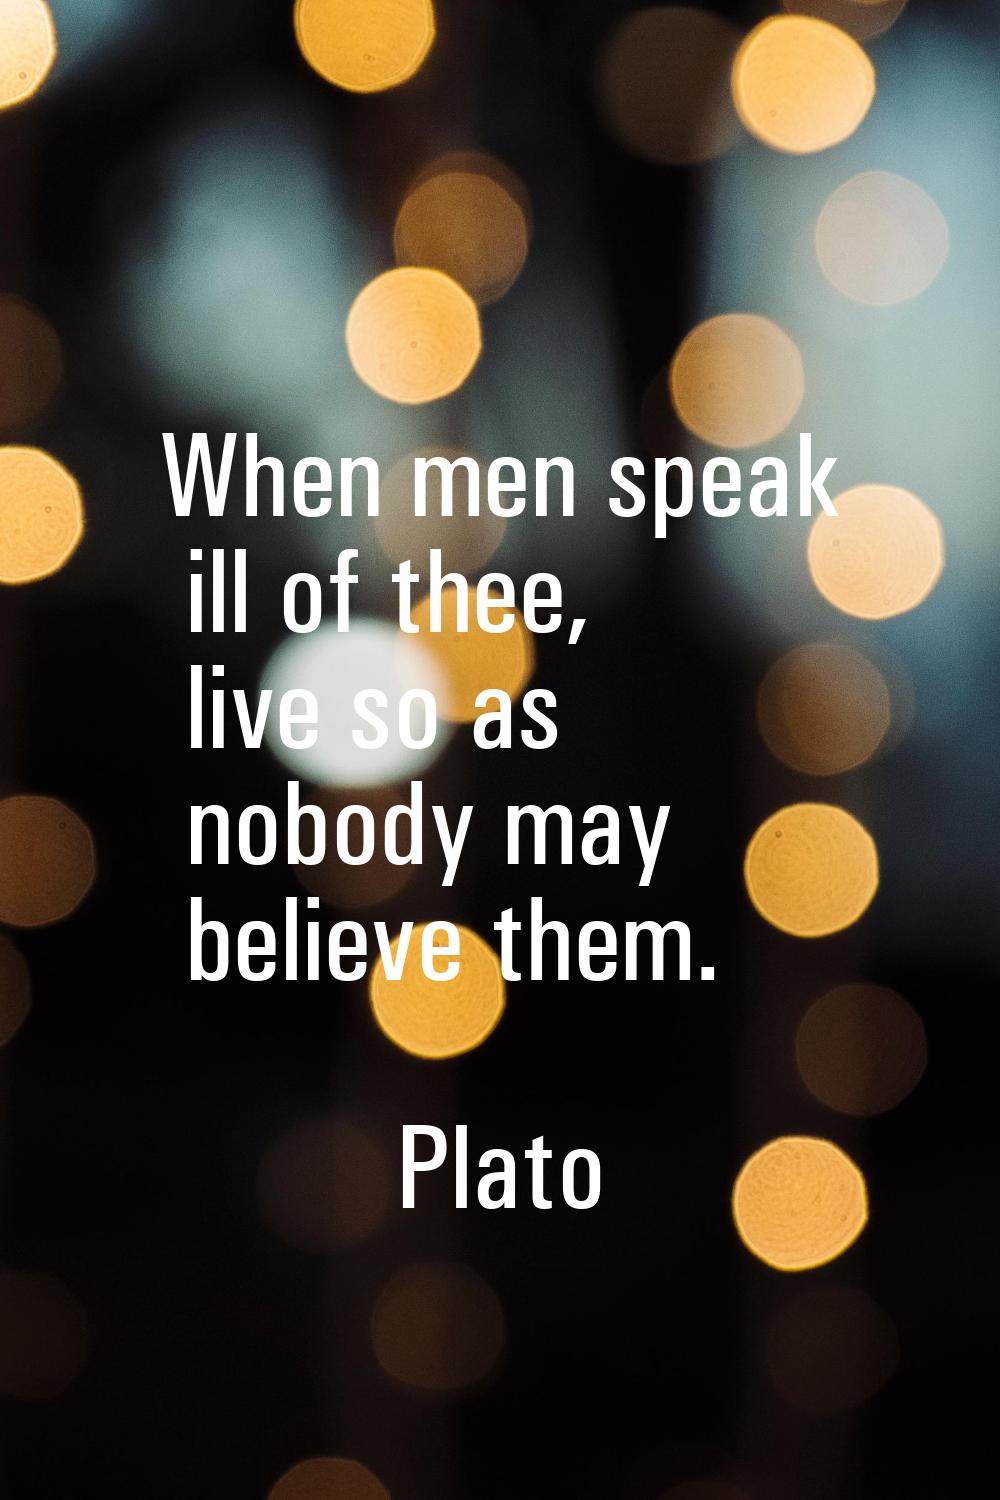 When men speak ill of thee, live so as nobody may believe them.